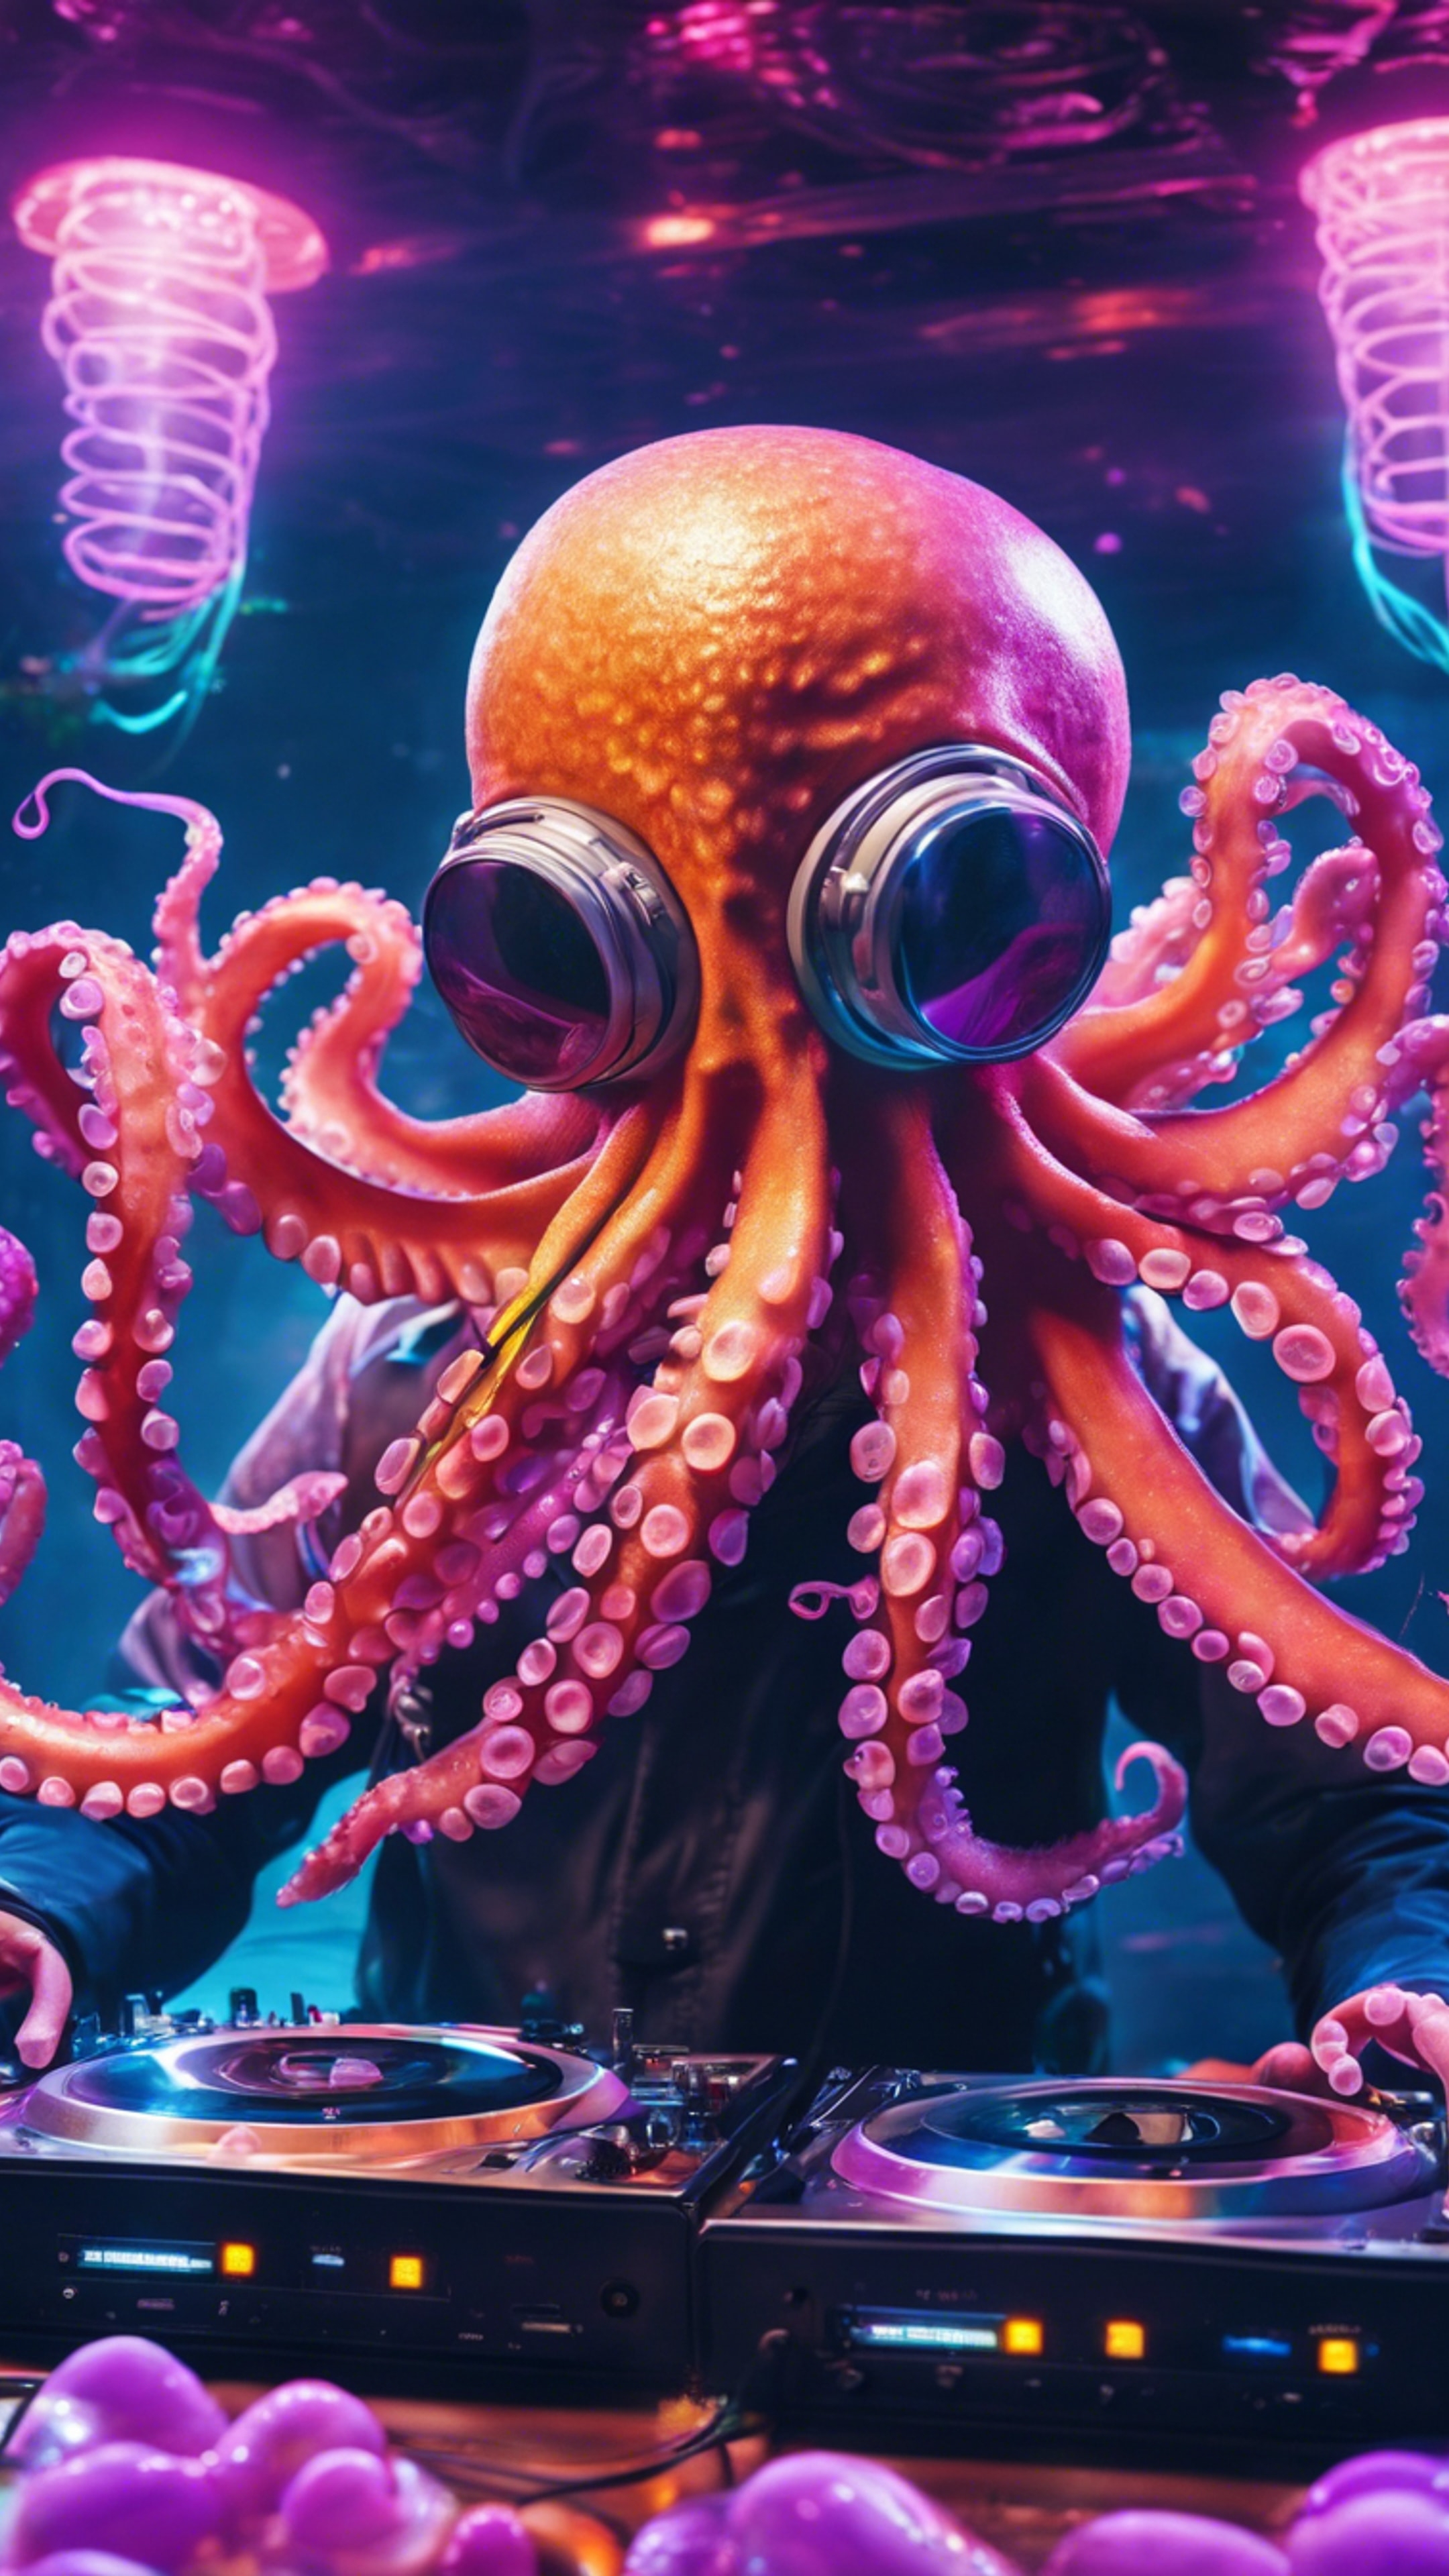 An octopus DJ controlling the music at an underwater rave amidst neon jellyfish. Tapeta[8d0f478d59094f5192d2]